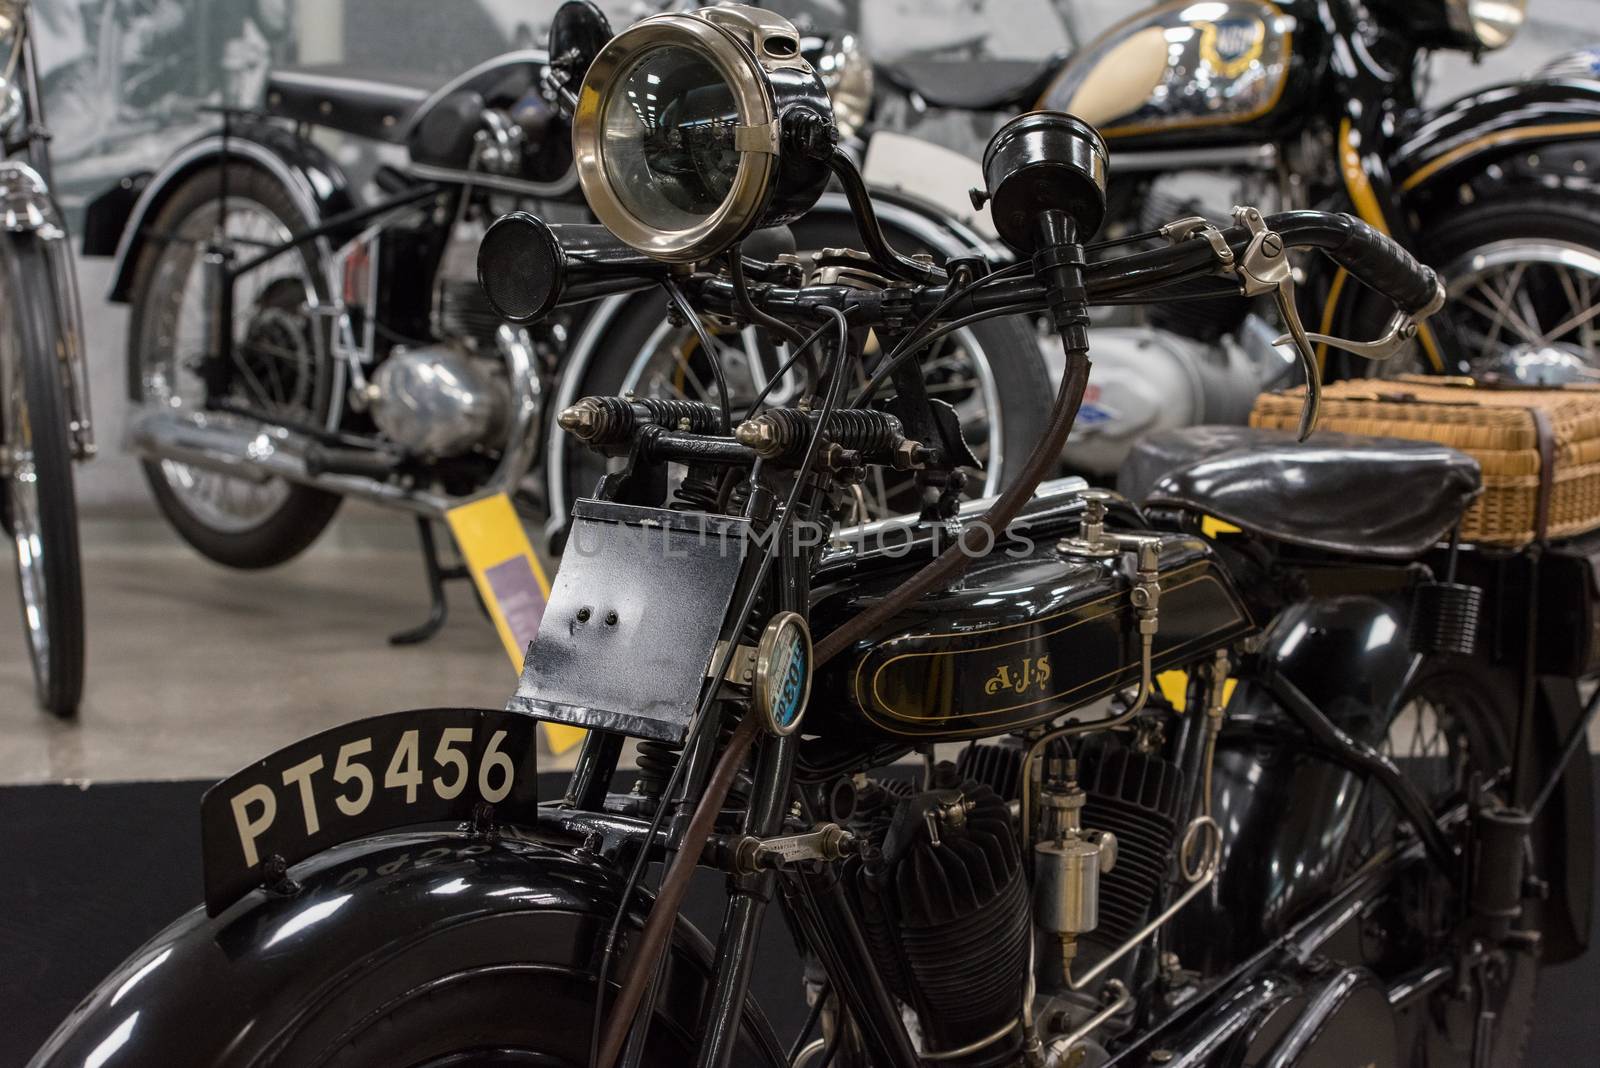 Canillo, Andorra - june 19 2020: Old motorcycles exposed on  the  Motorcyle Museum in Canillo, Andorra on June 19, 2020.